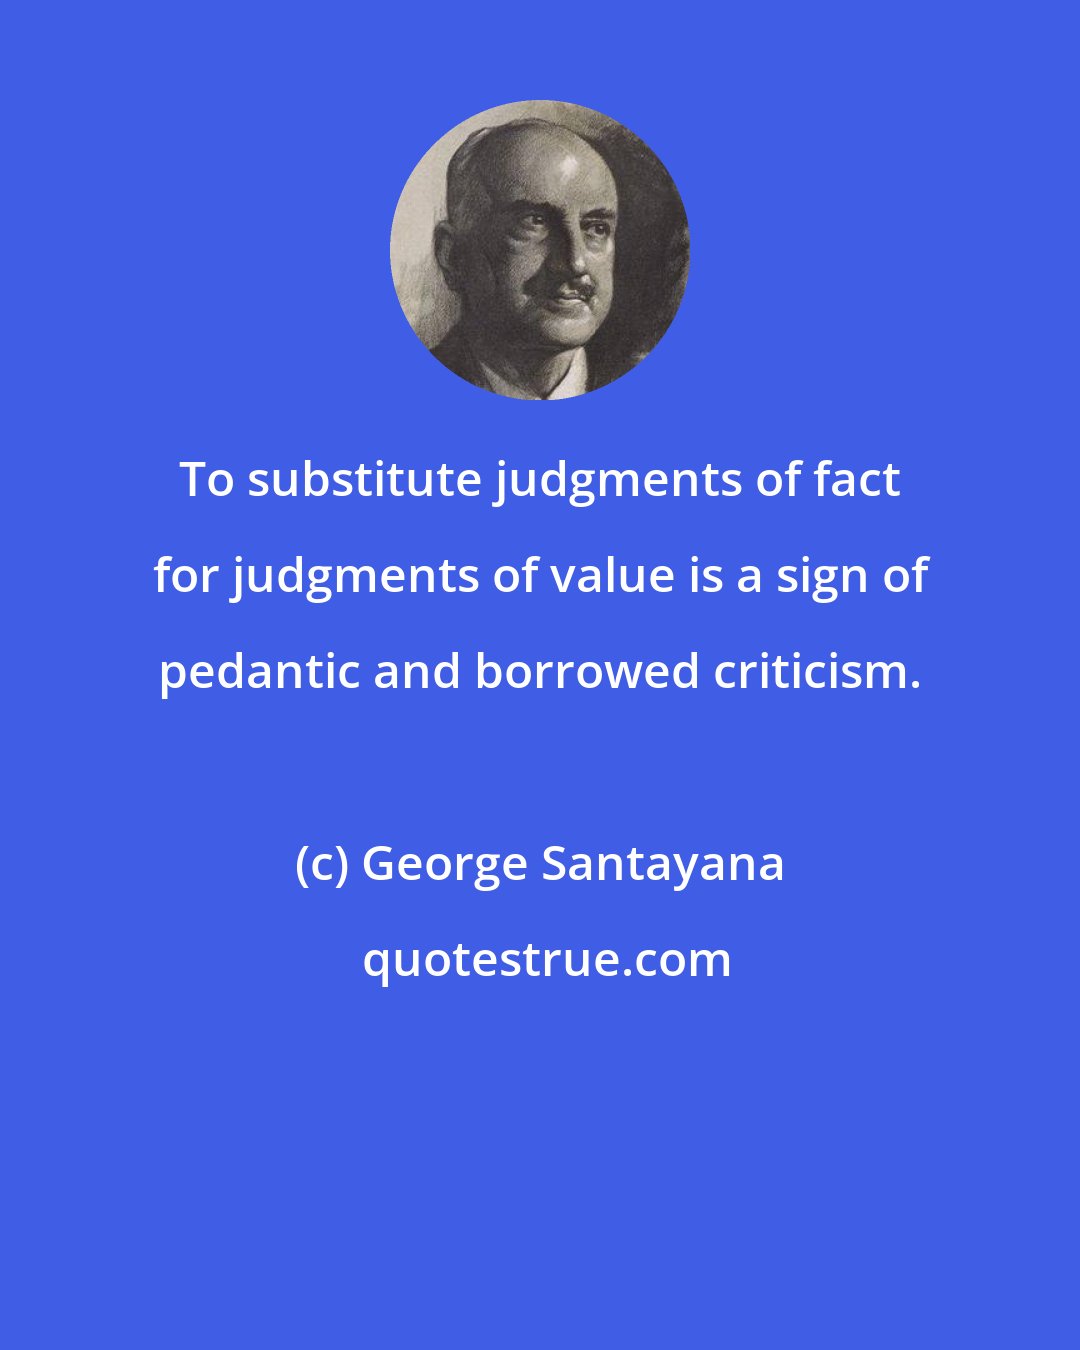 George Santayana: To substitute judgments of fact for judgments of value is a sign of pedantic and borrowed criticism.